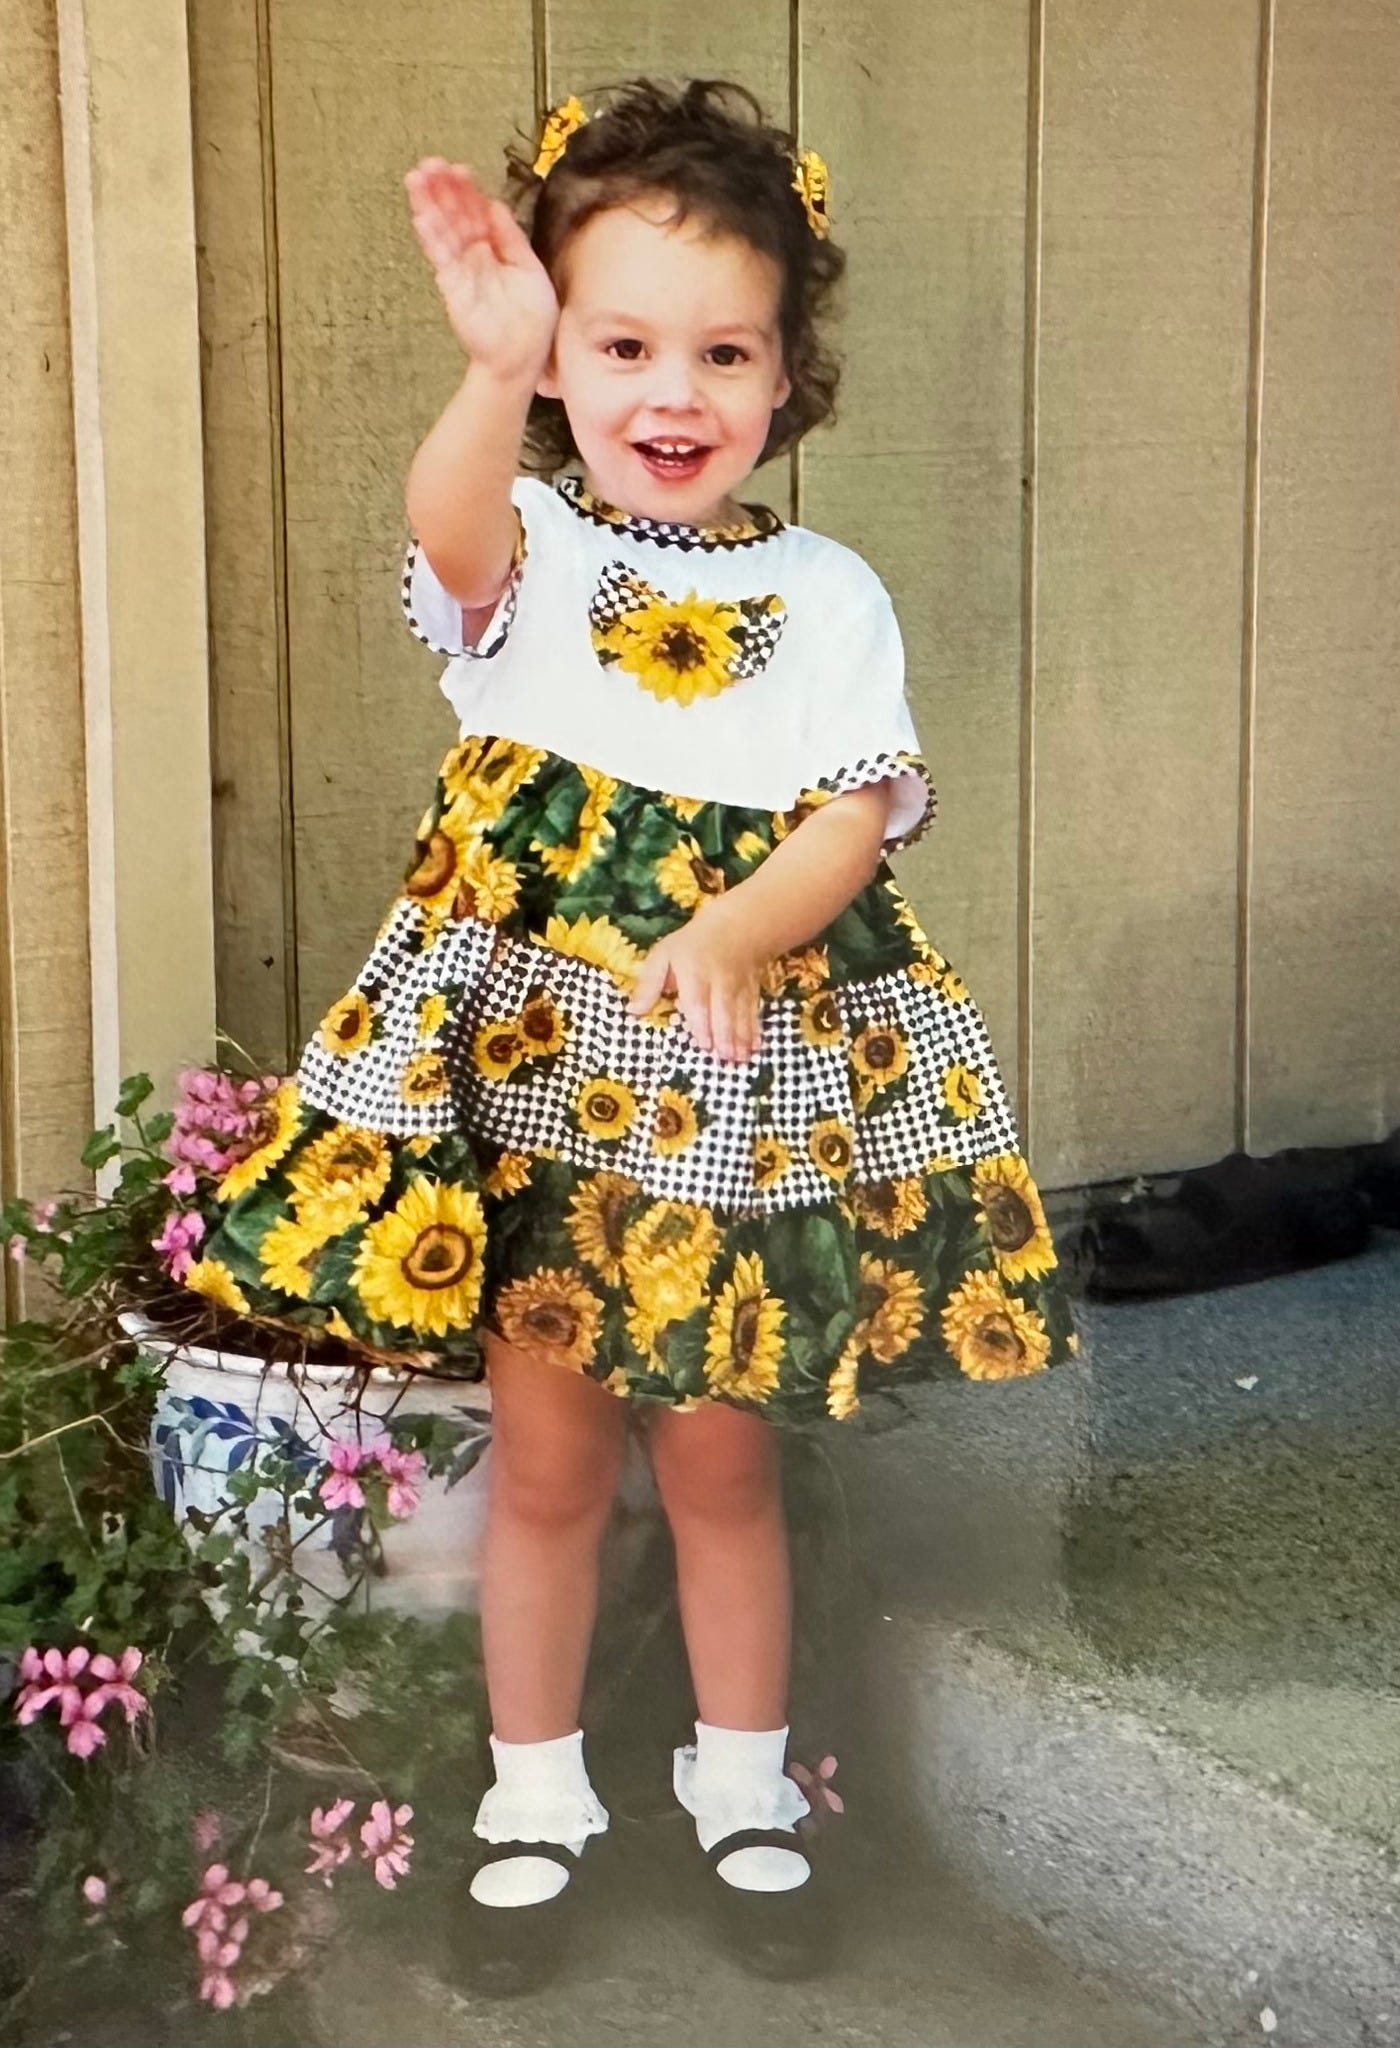 2 year old Chloe waves at the camera with an easy smile. her dress is alternating fabric of sunflowers and black and white checkered print, and she has sunflower clips in her hair.